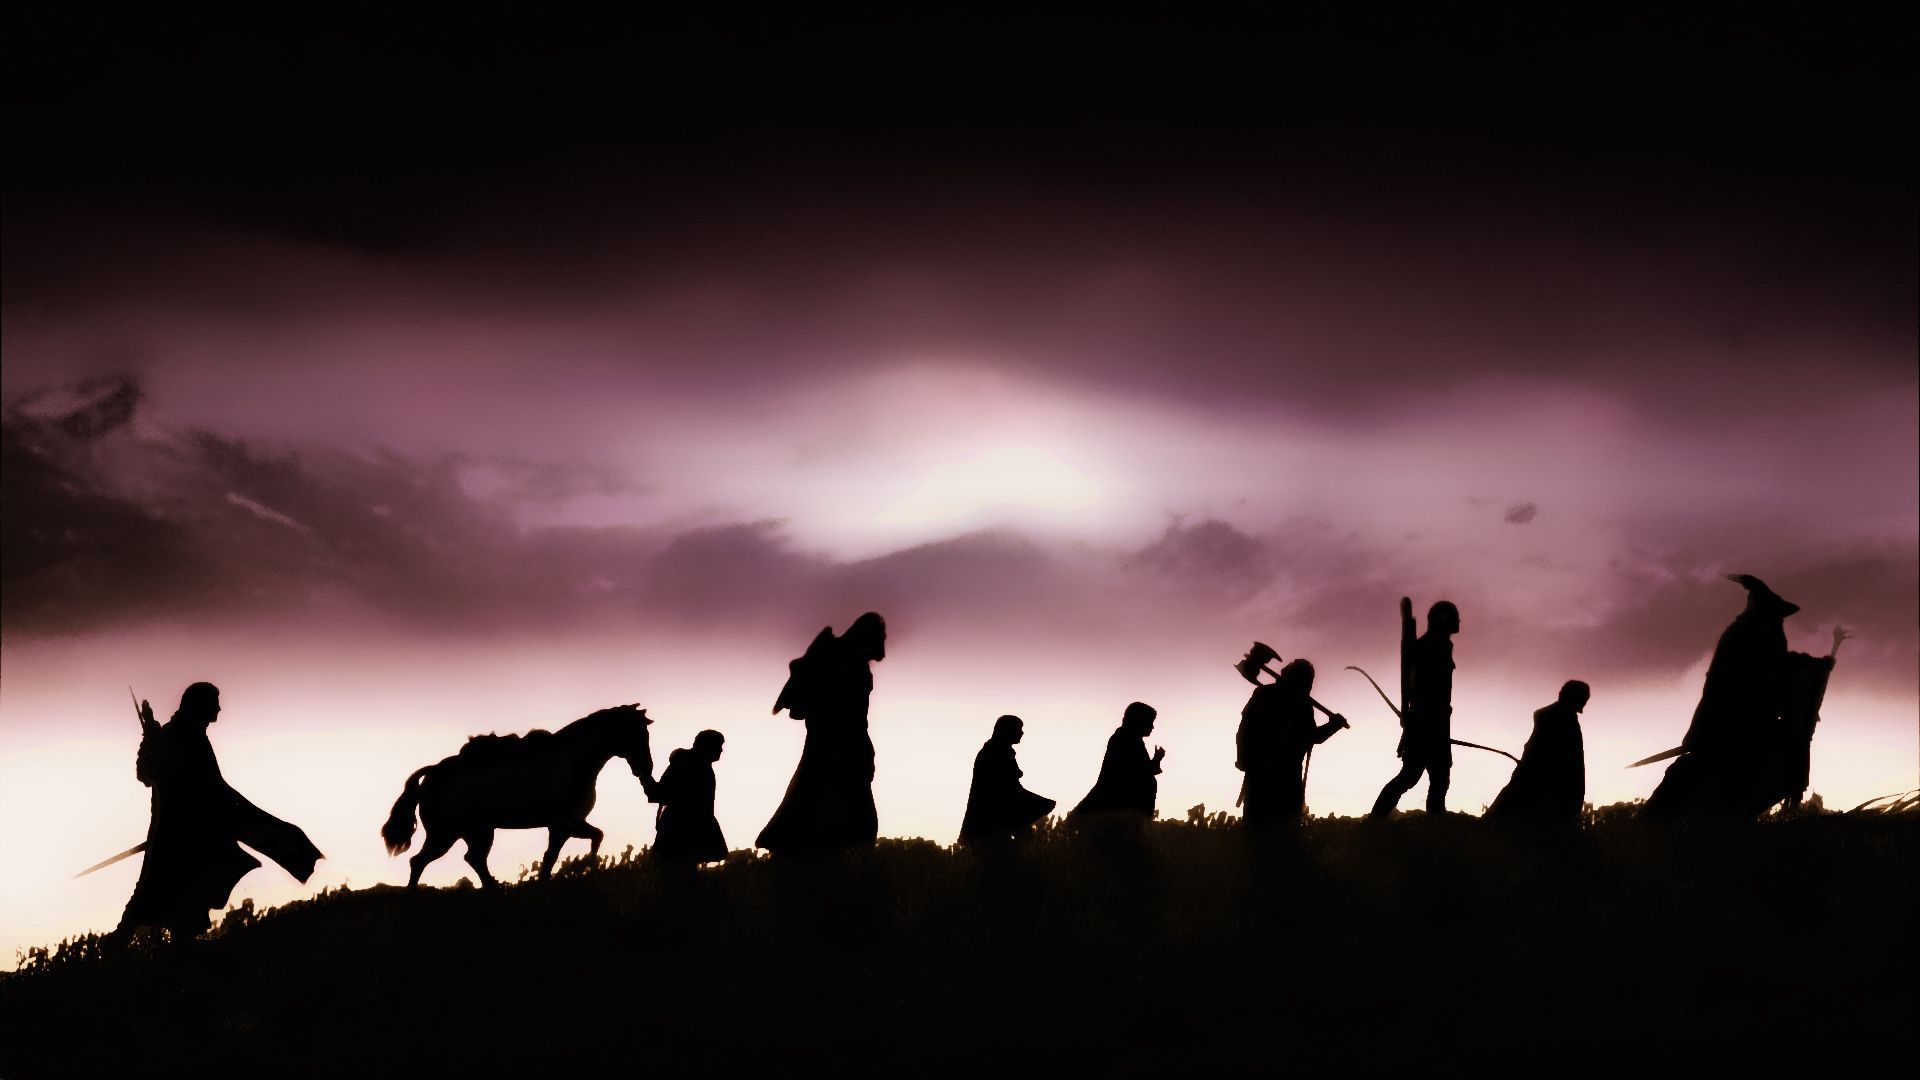 Lord of the Rings, Fellowship of the Ring, Silhouettes